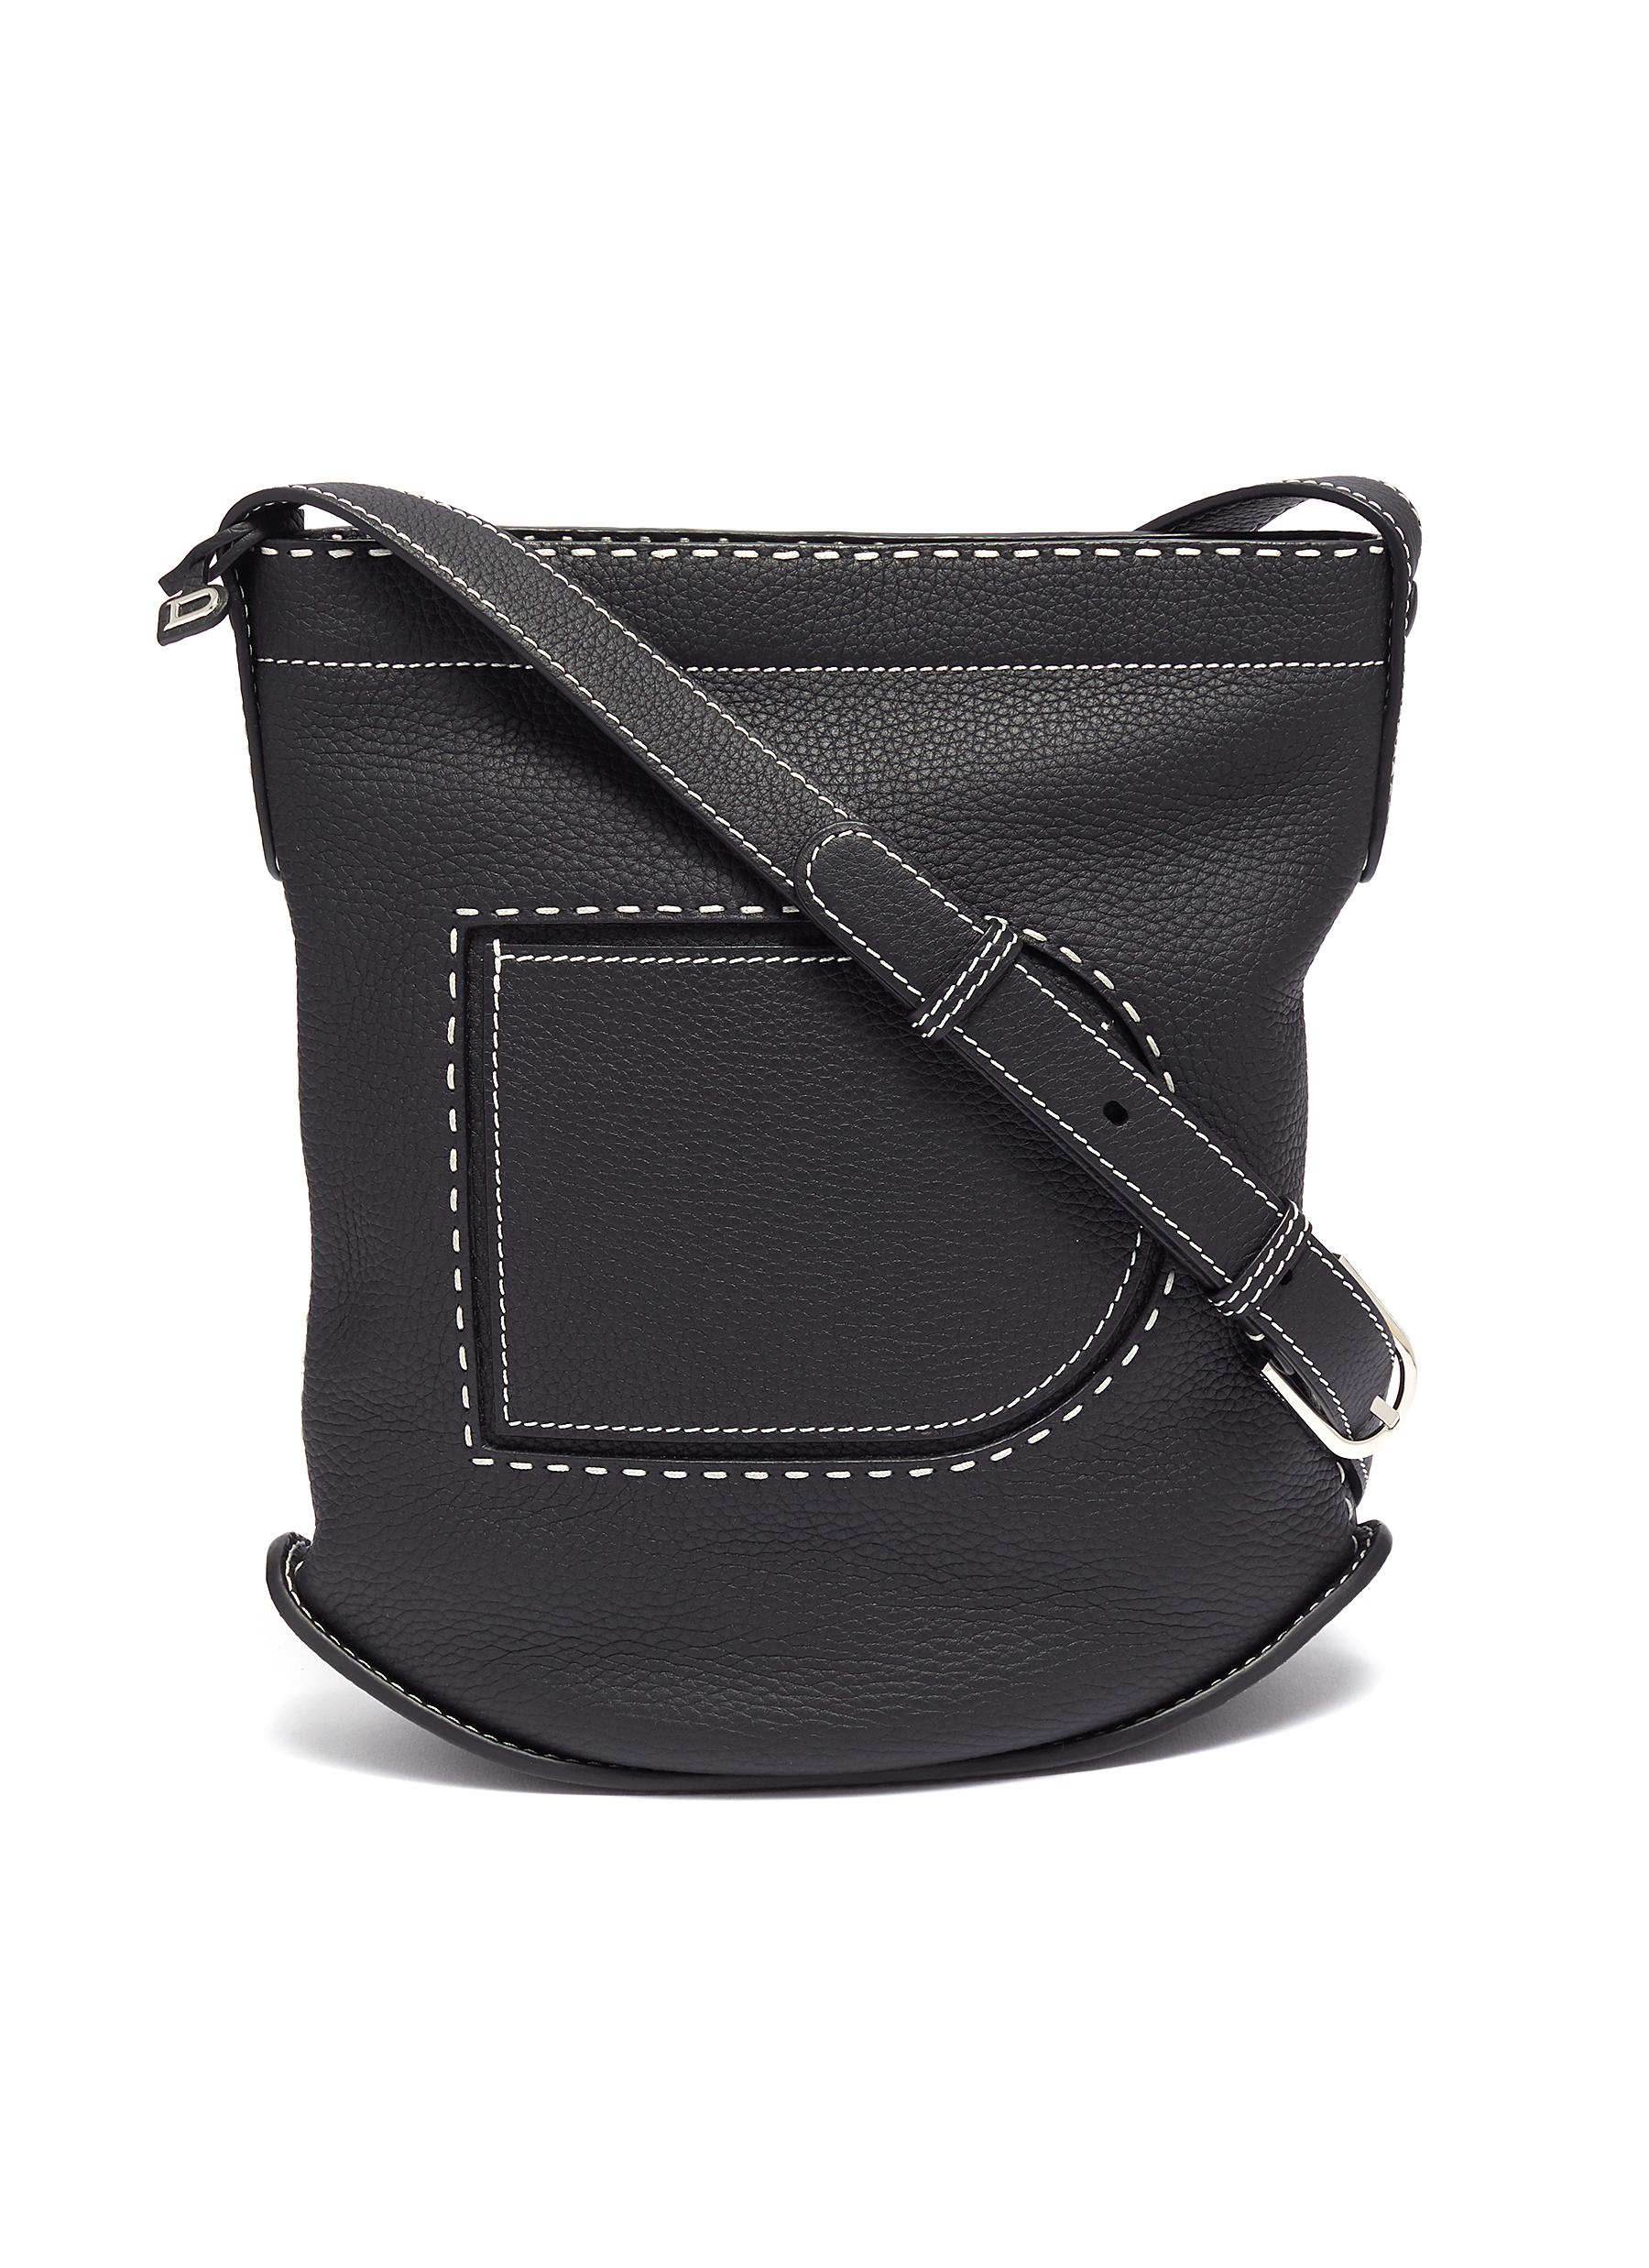 Delvaux 'pin Pm' Contrast Topstitching Leather Bucket Bag